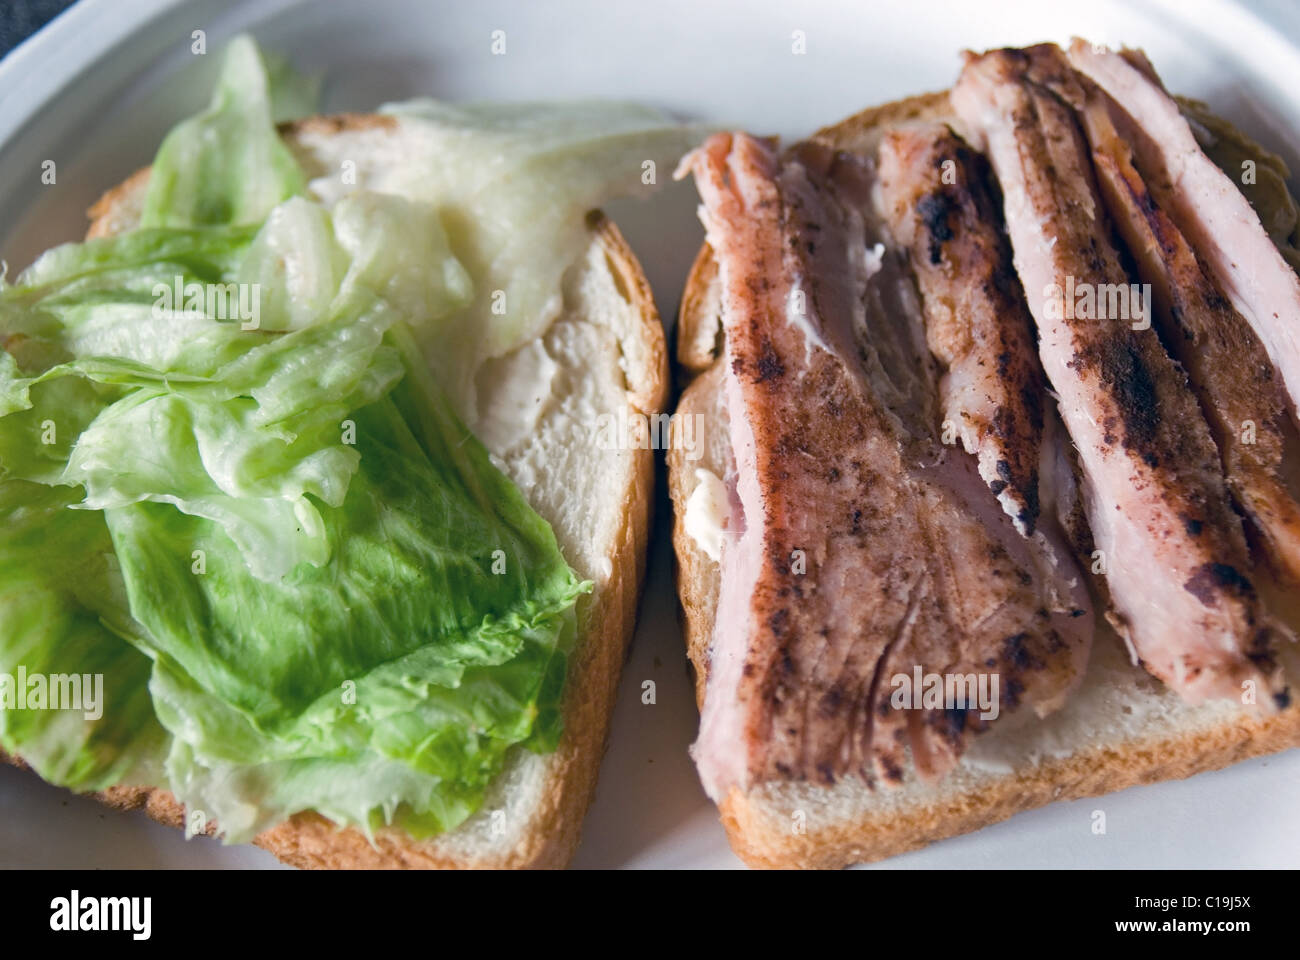 Grilled ham and lettuce on bread ready to be a sandwich at a picnic. Stock Photo